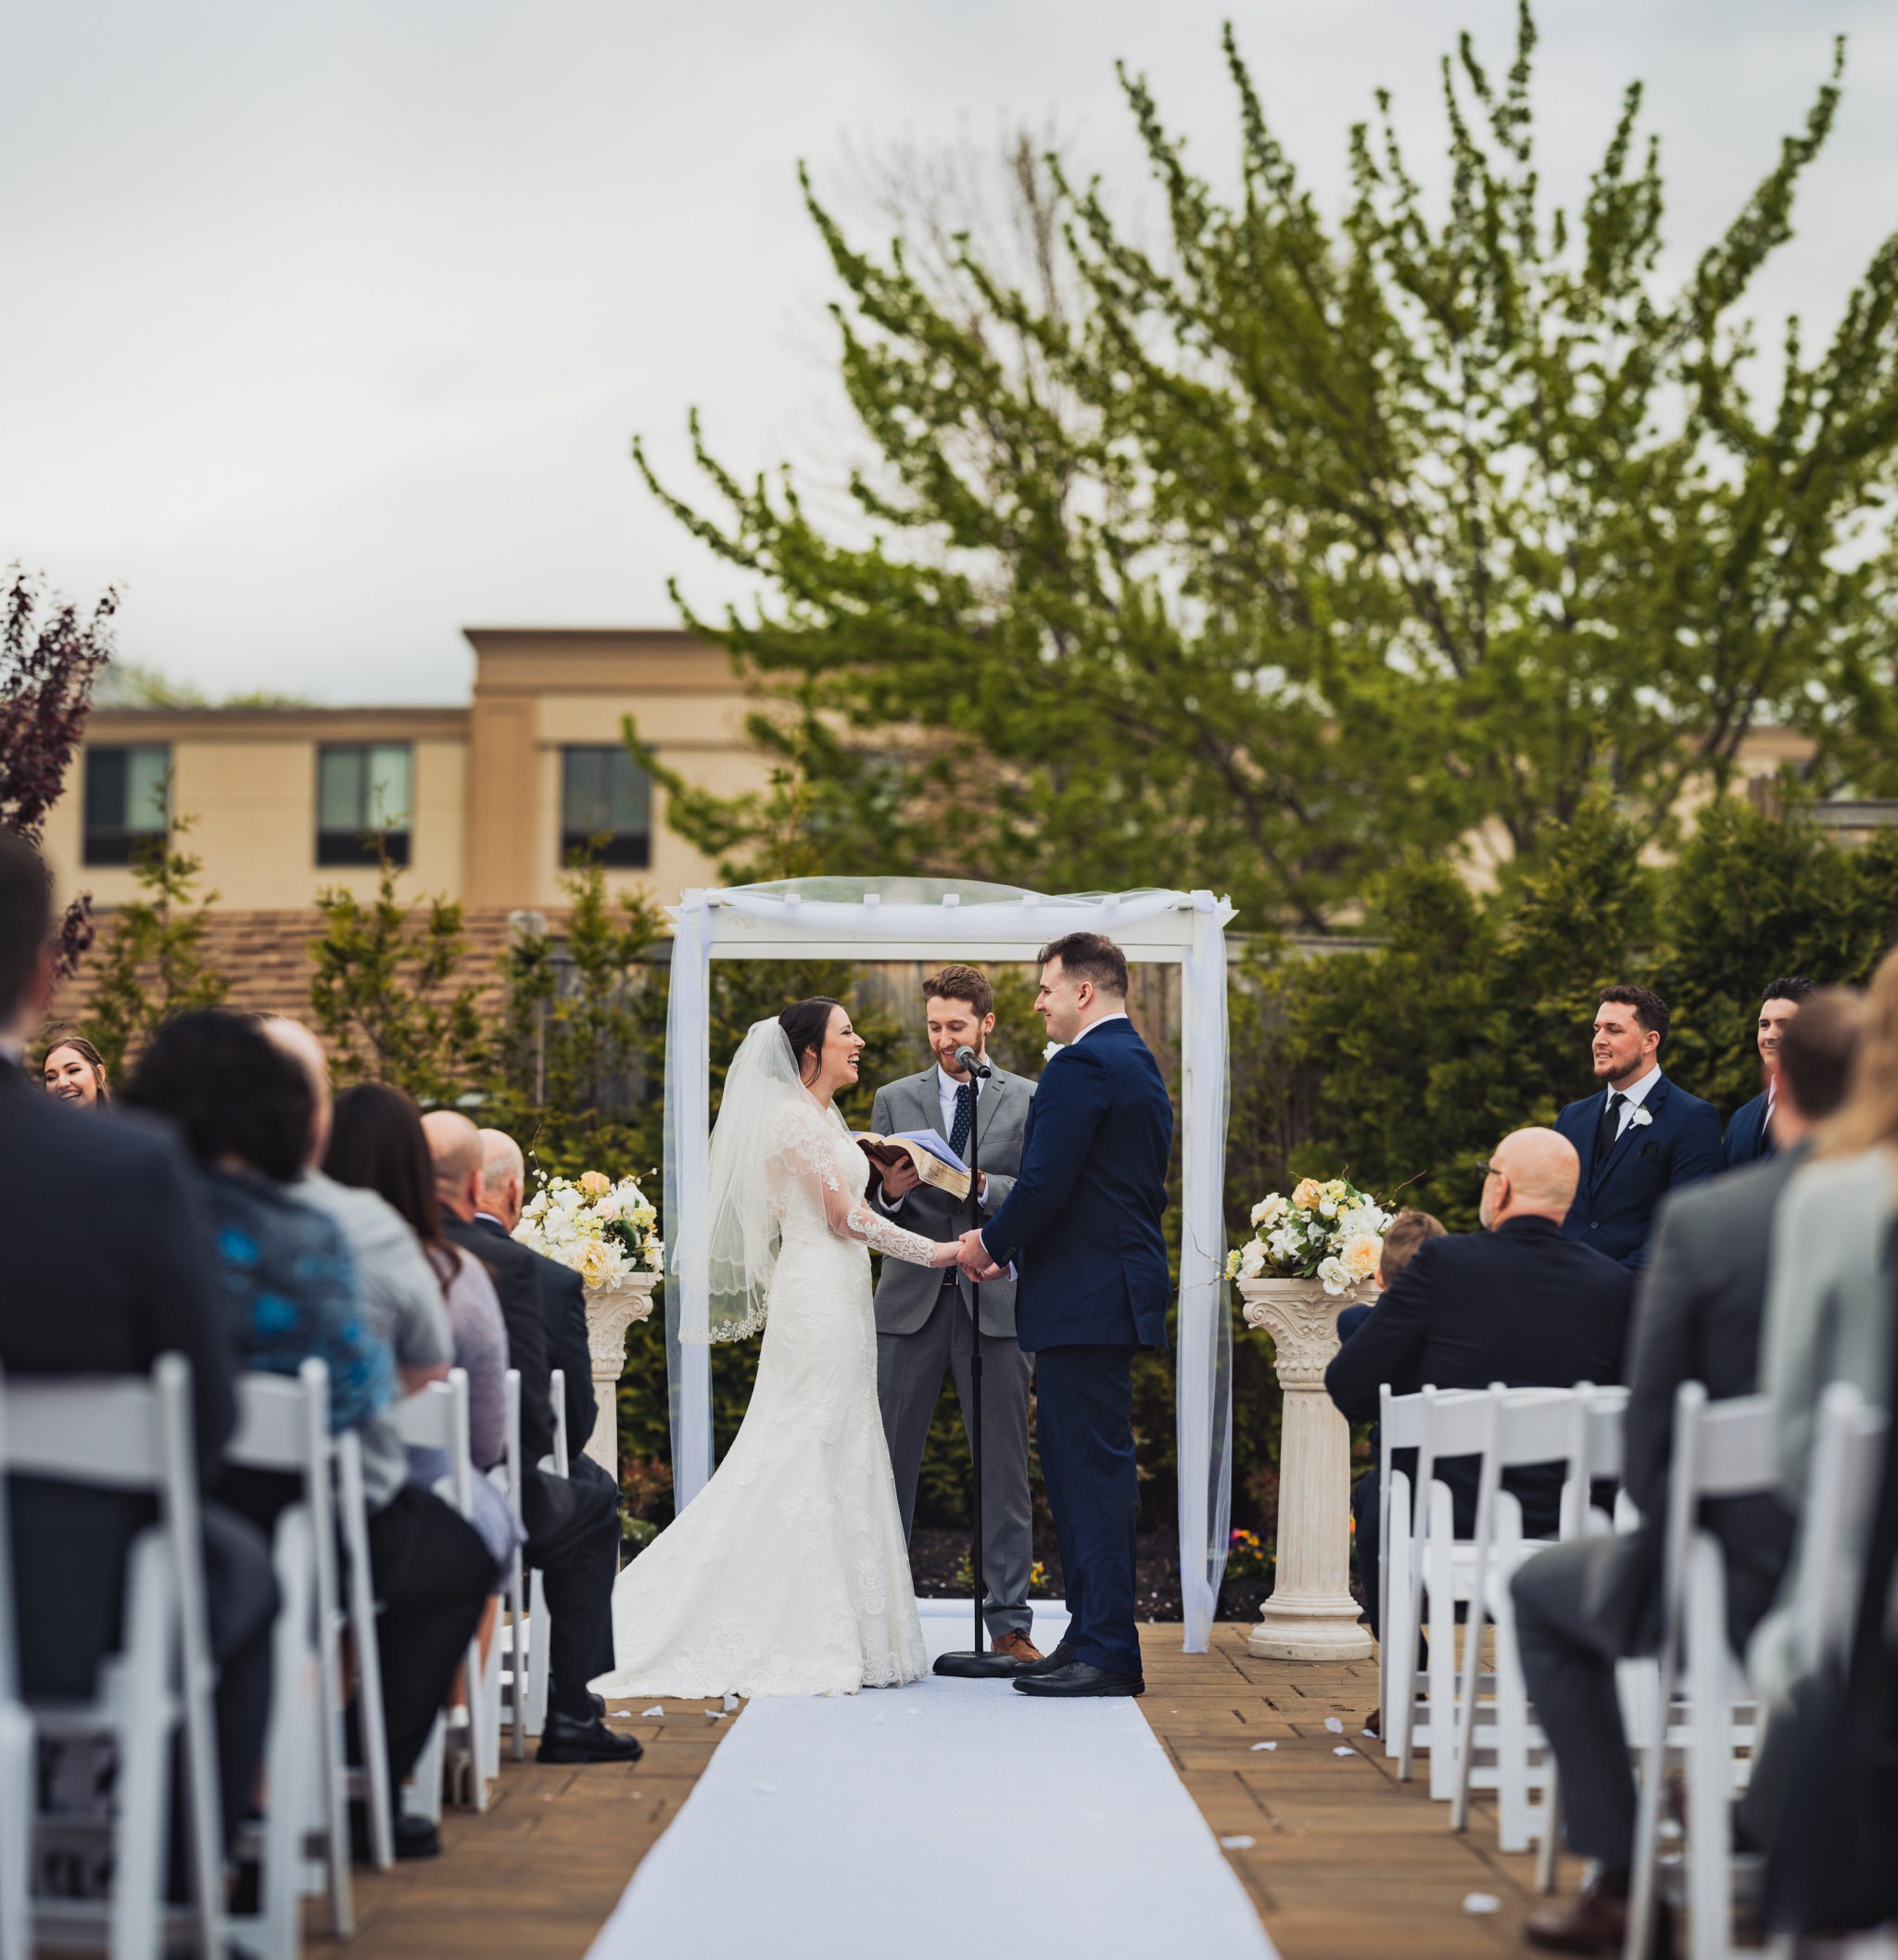  Photos taken during Luke and Kelly's wedding in New Jersey. photographed with a photojournalistic style and with story telling in mind. 

This was a wide brenizer-style panorama that I did, stitching together 8 images to really create that narrow fo